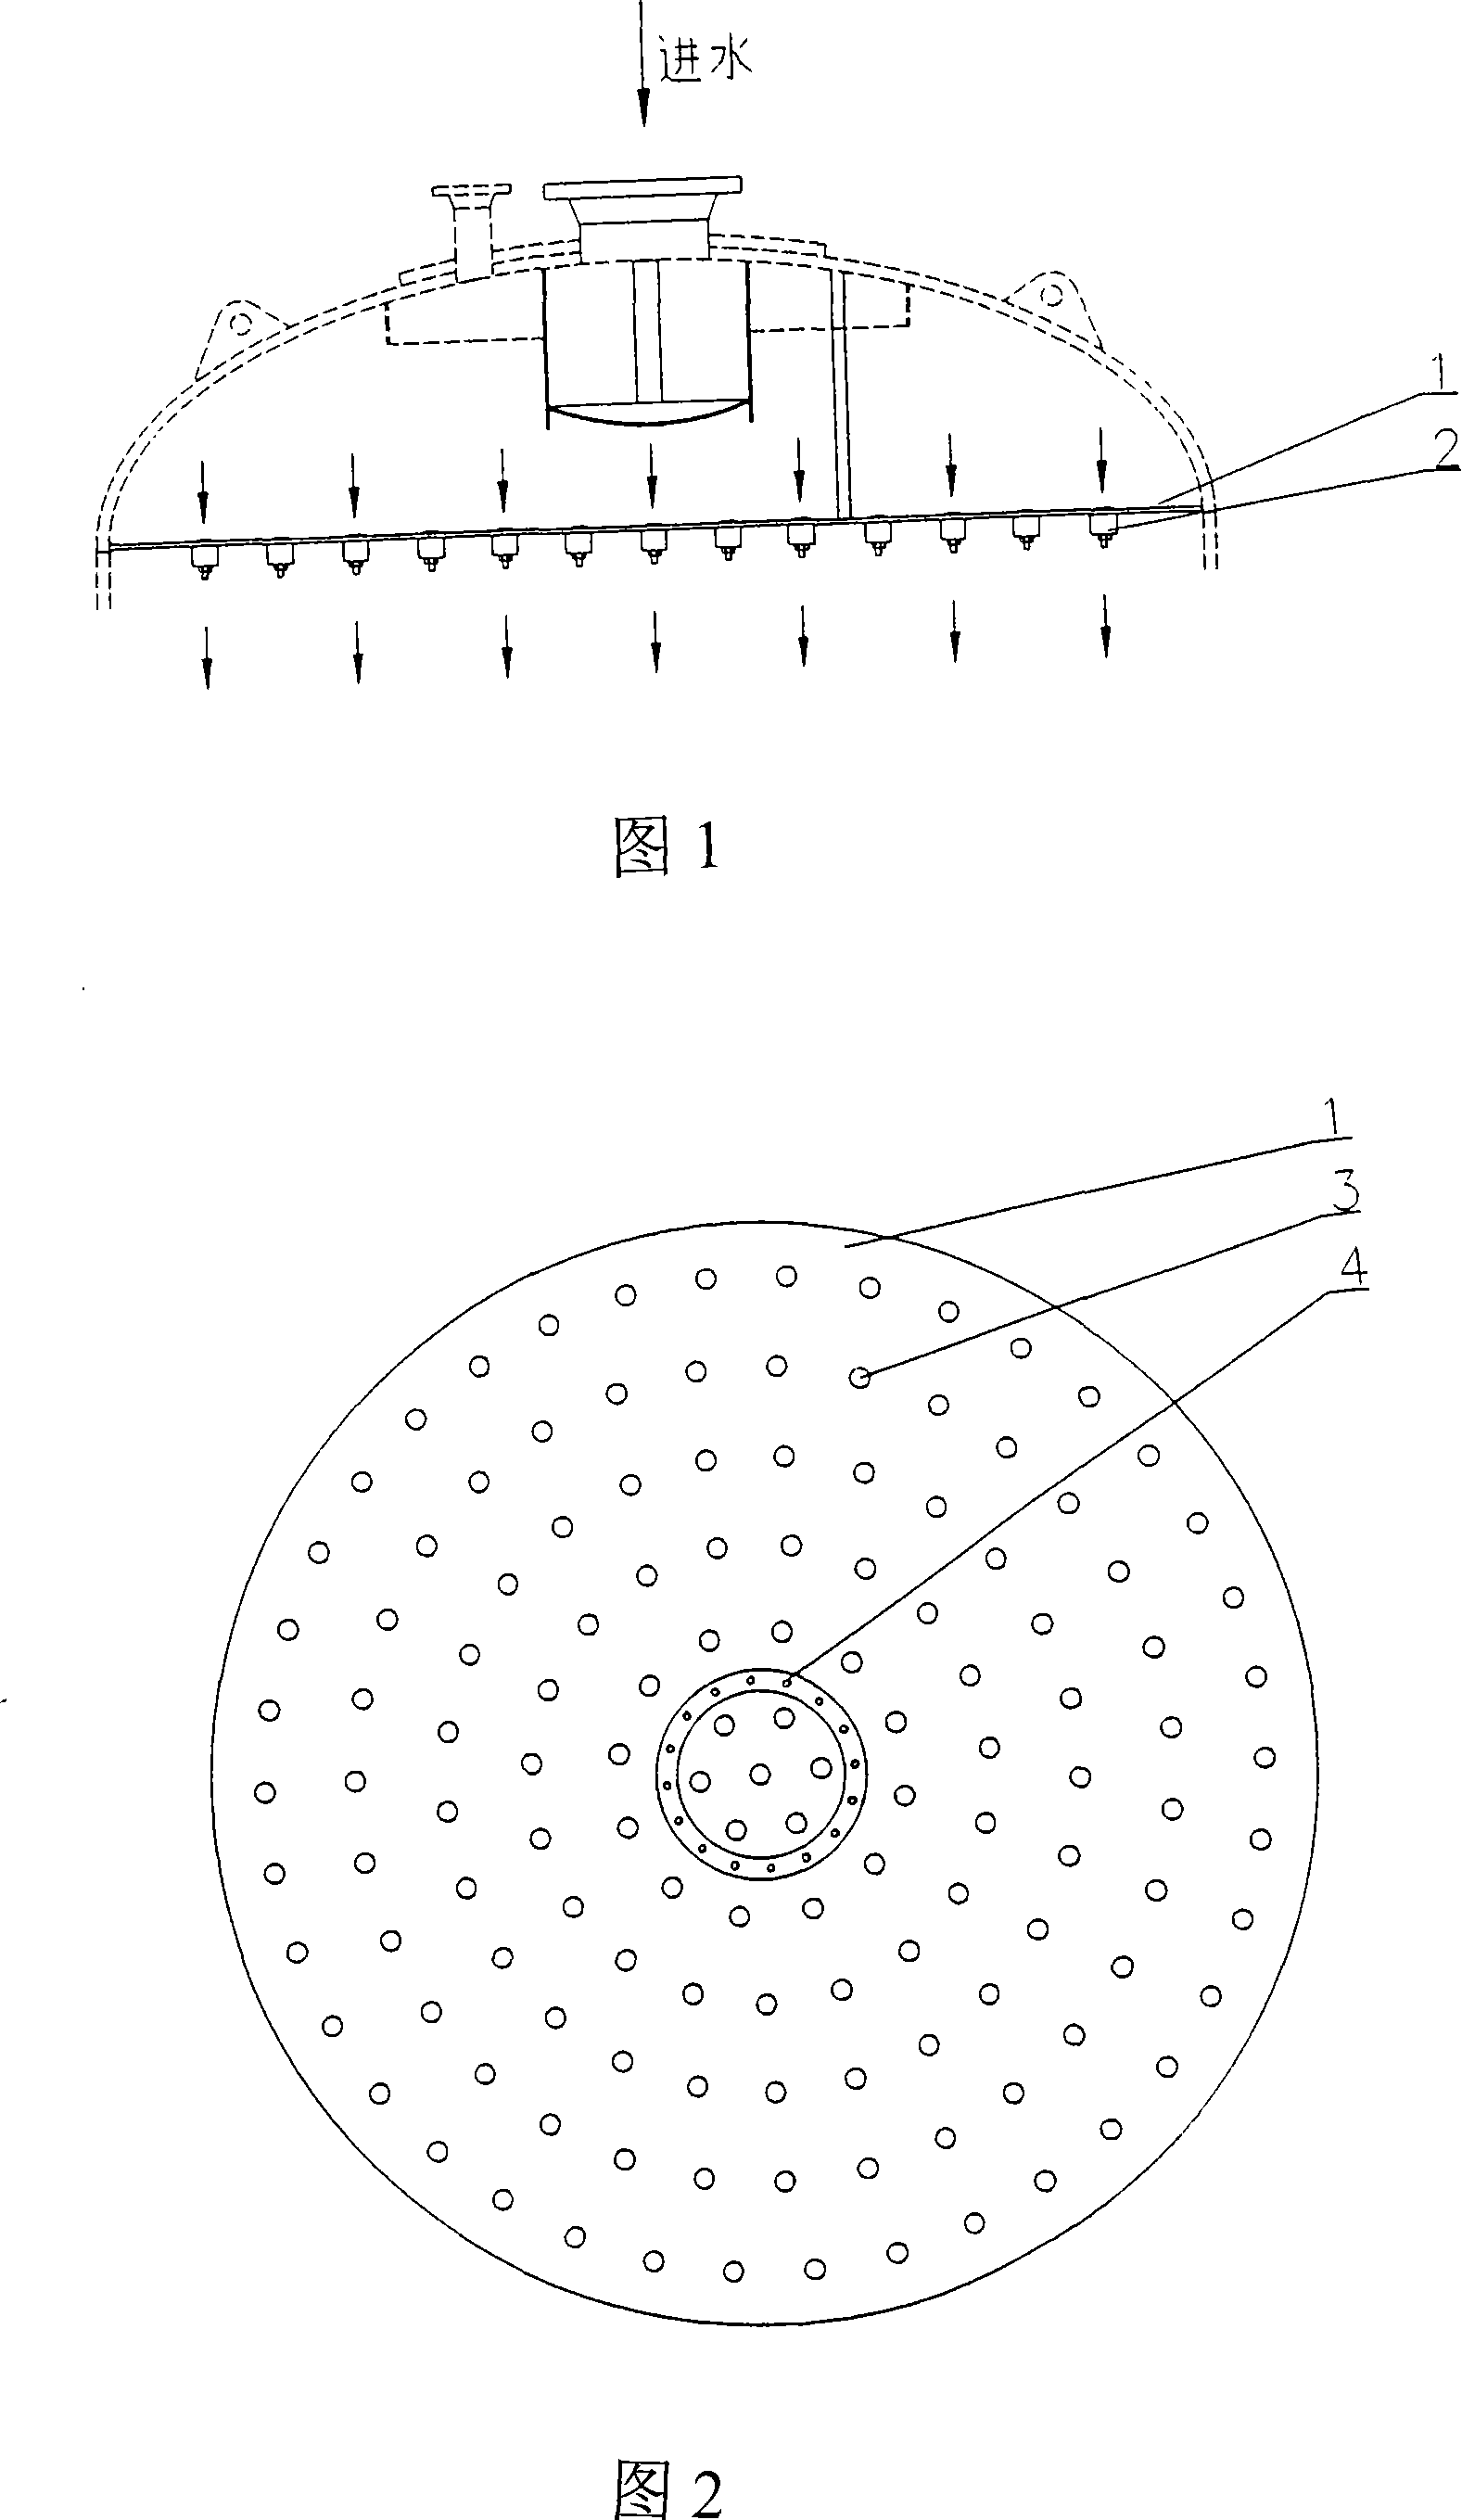 Water distributing plate used for high flow velocity equipment